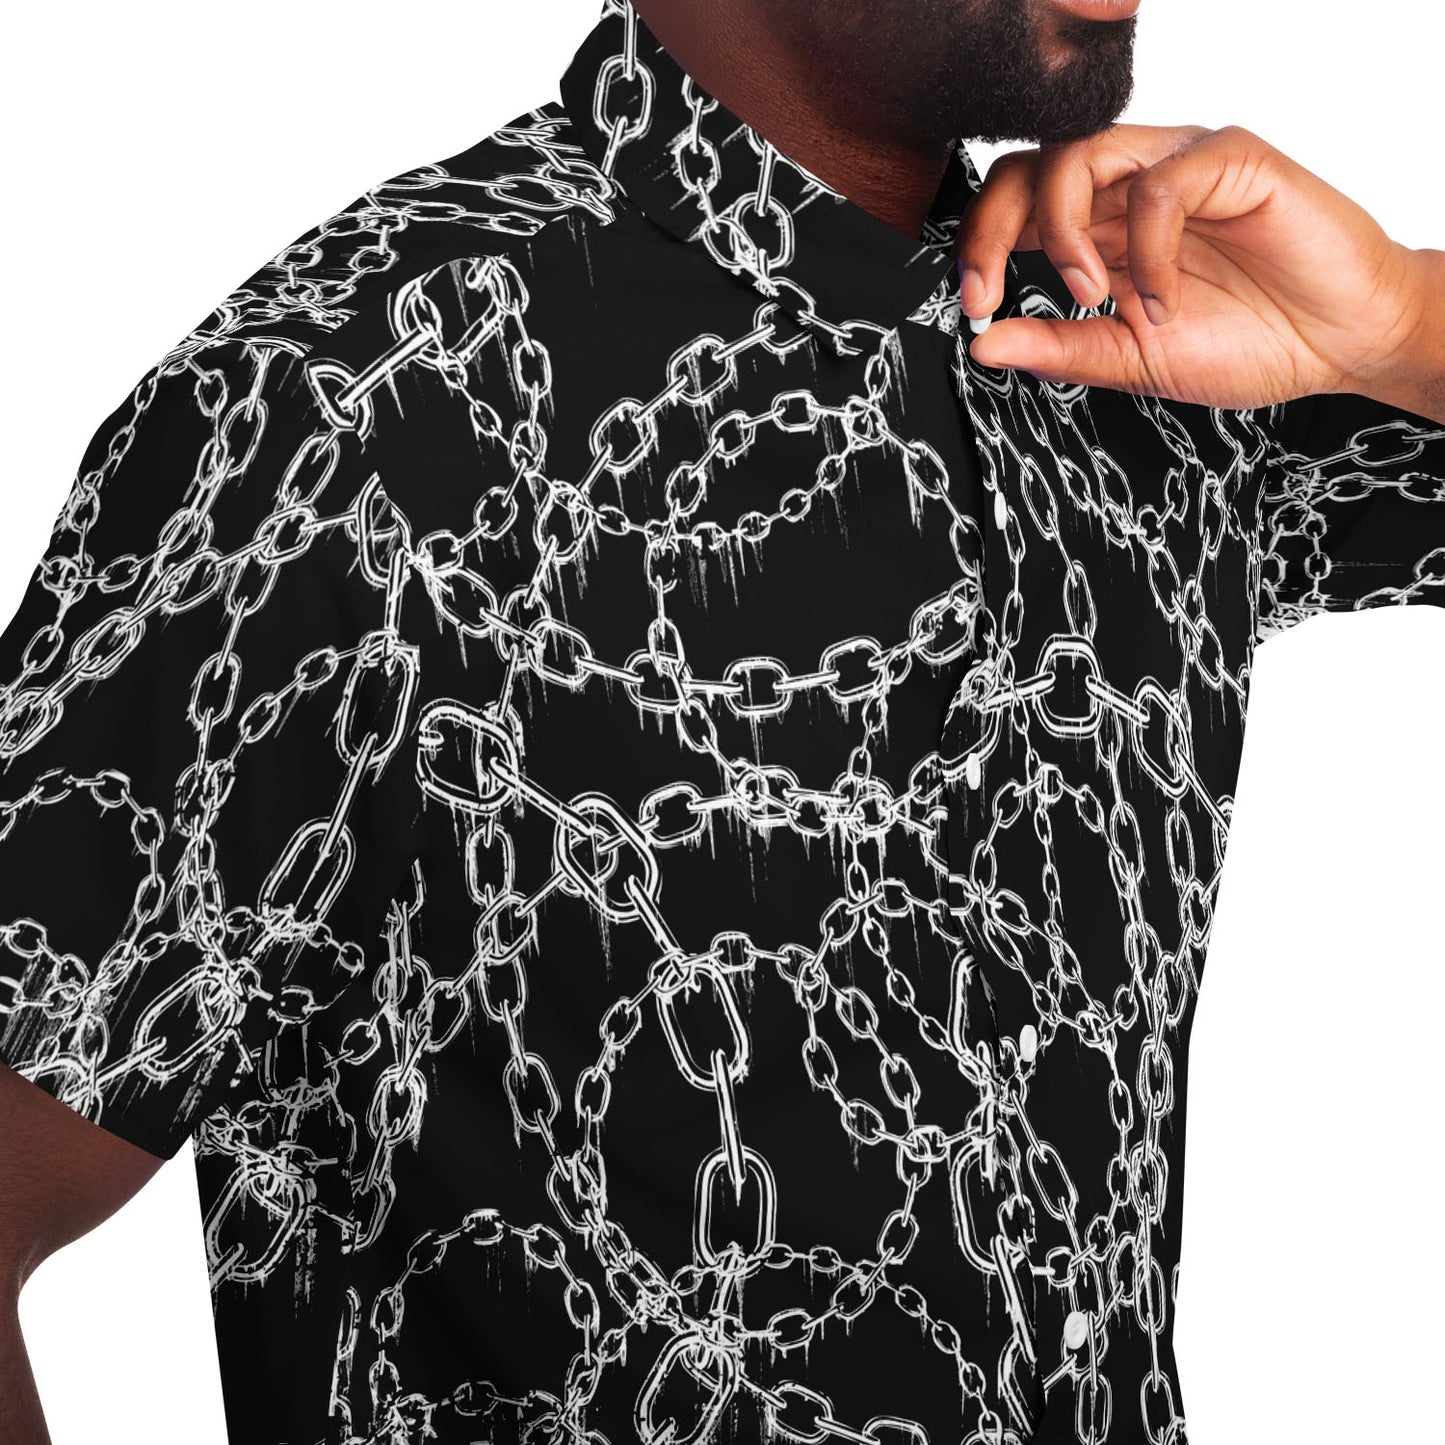 Chained Personalized short sleeve button down shirt